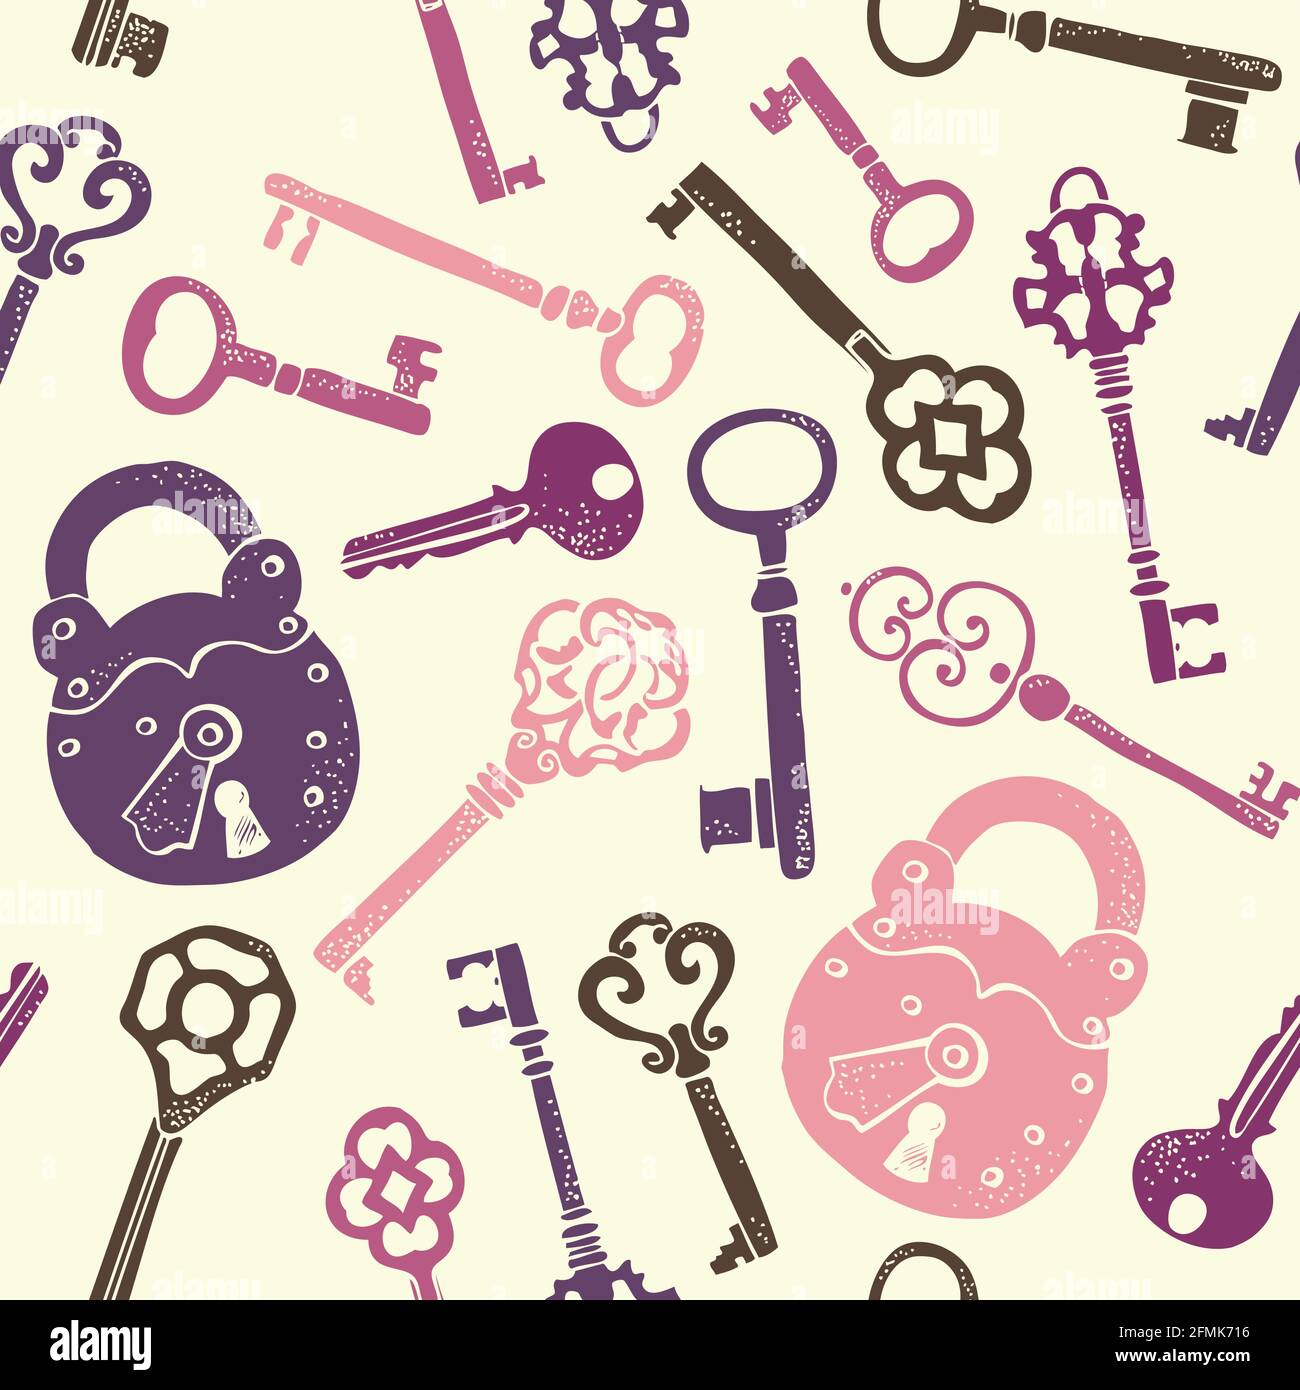 Keys vintage seamless pattern, old keys vector background with decorative elements in retro style Stock Vector